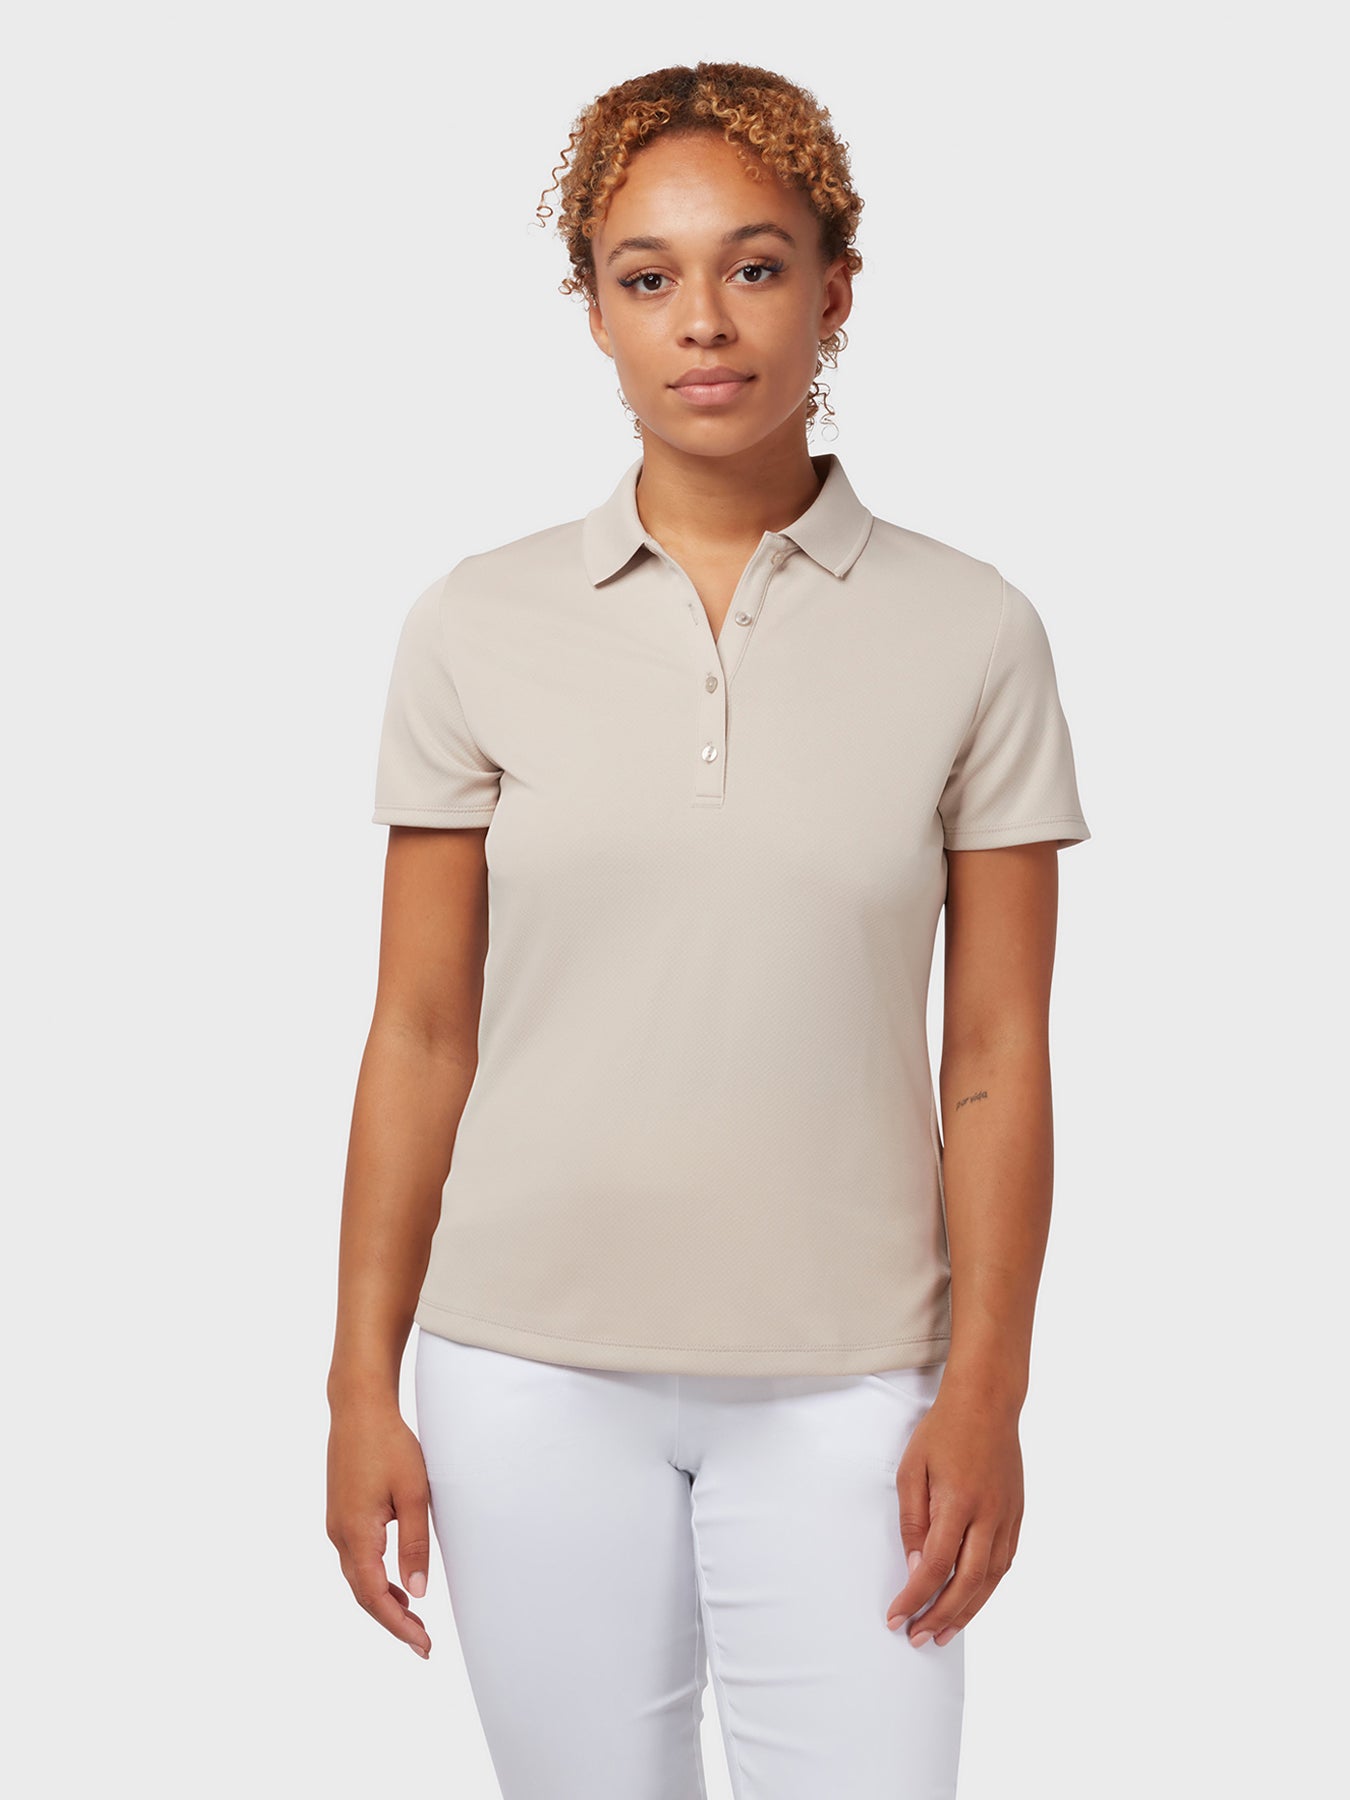 View Swing Tech Womens Polo In Chateau Grey Chateau Grey S information